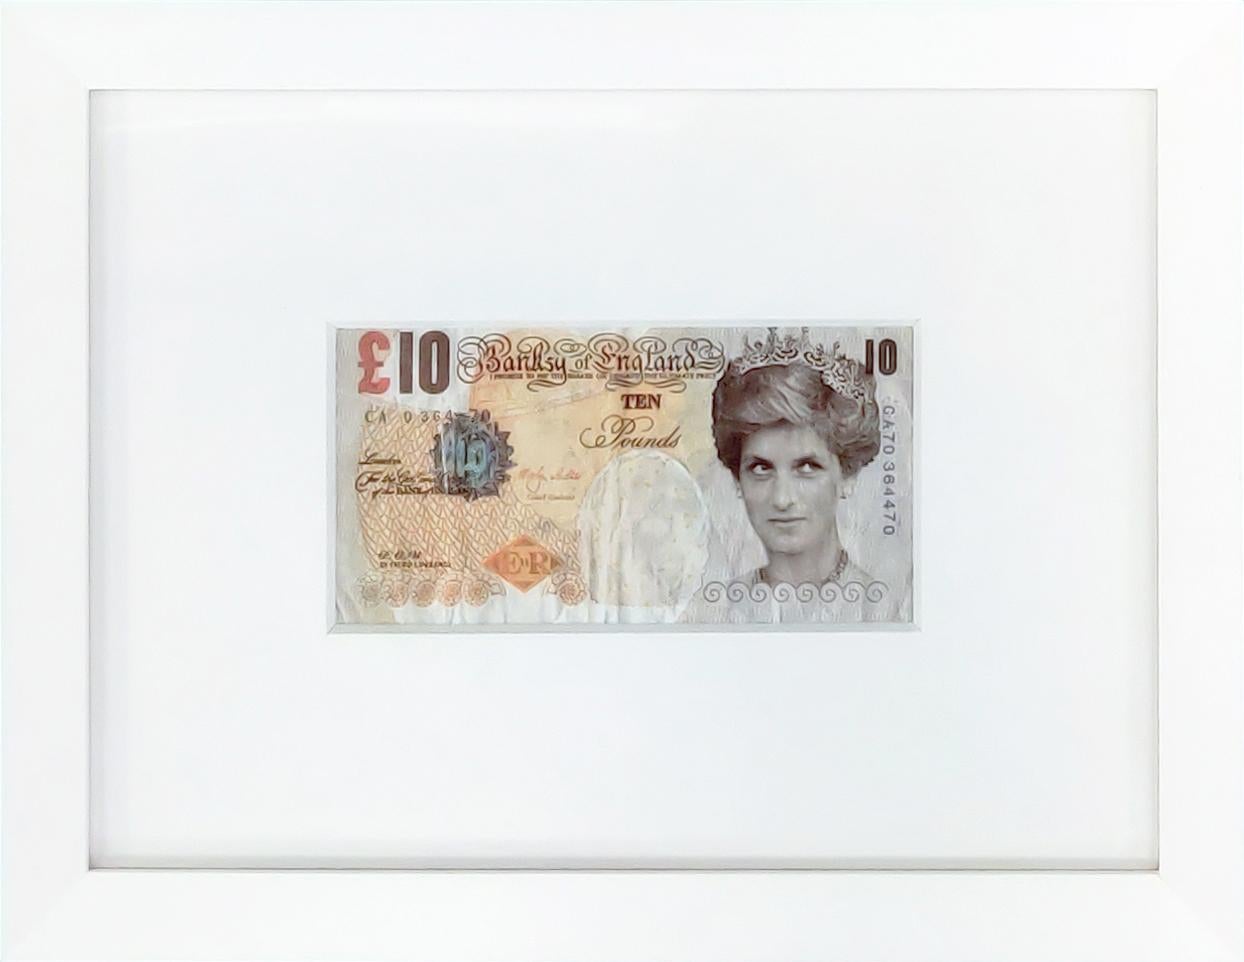 Banksy Portrait Print - DI-FACED TENNER (10 GBP NOTE)